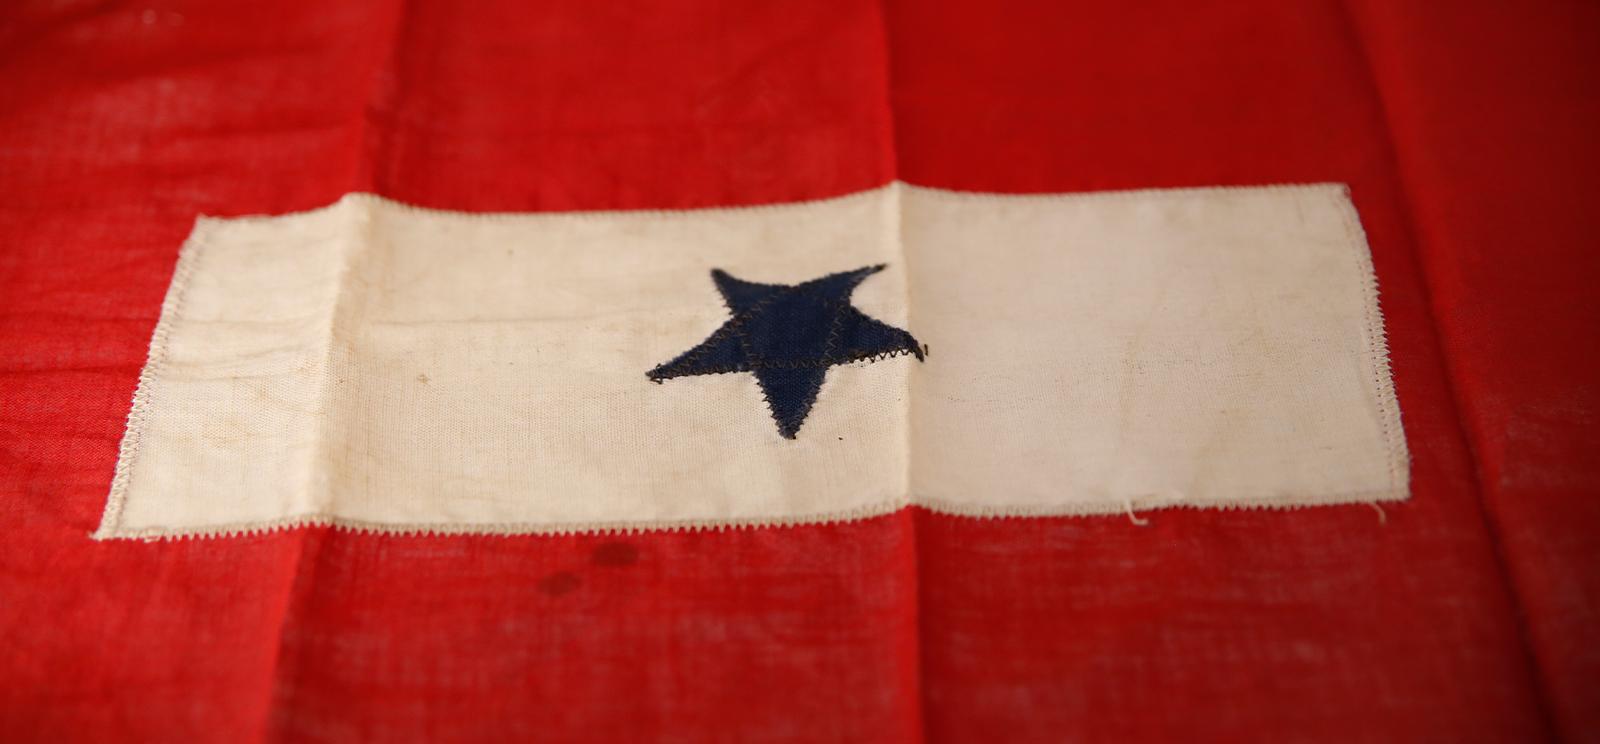 Modern photograph of a WWI-era cloth flag. A red border surrounds a white/cream rectangle with a single dark blue star embroidered in the middle.